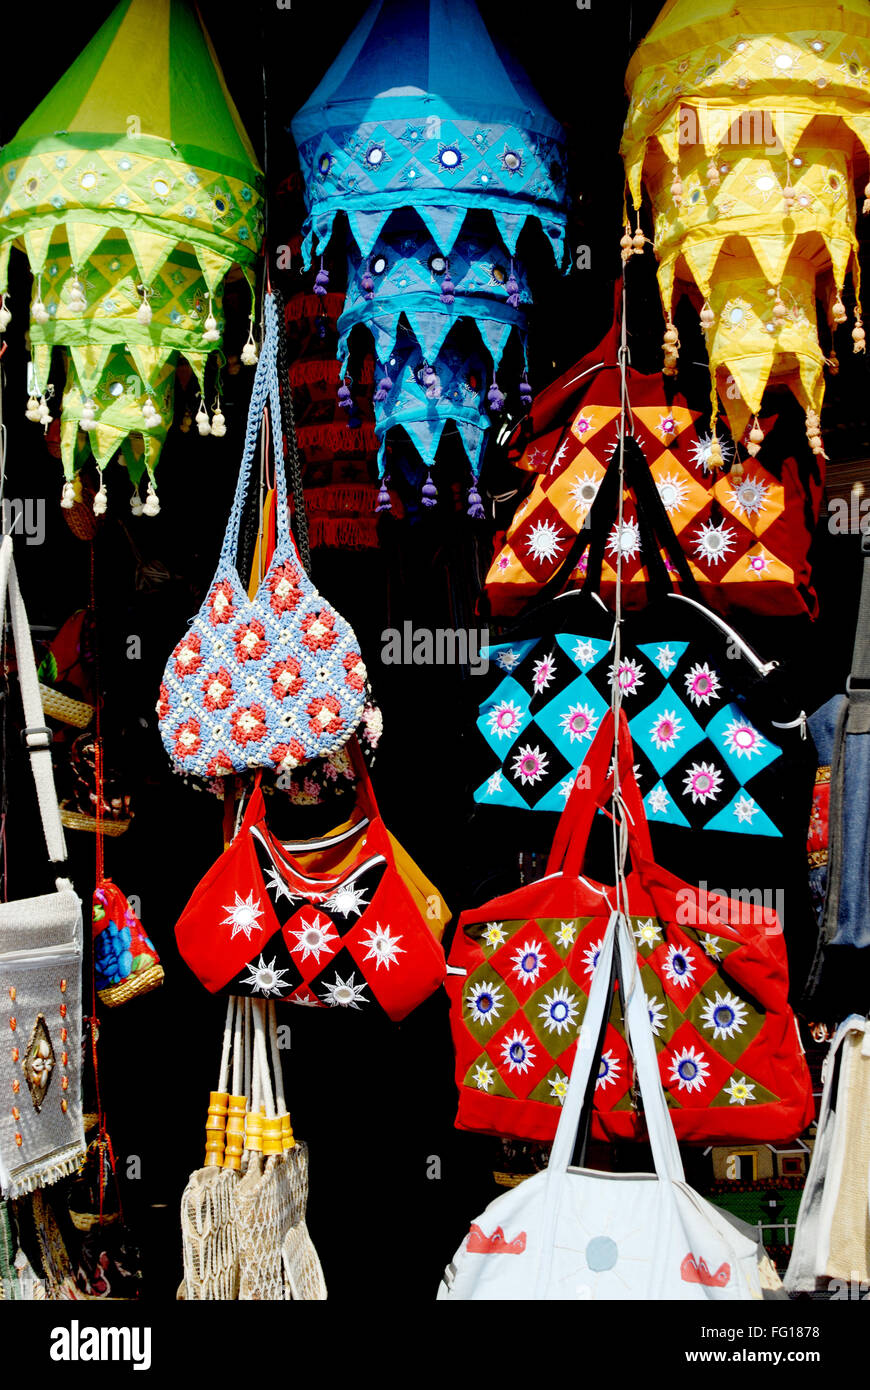 Decorative different types of Colourful lamps bags purse hanging wall piece made of cotton fabric and patch work Stock Photo